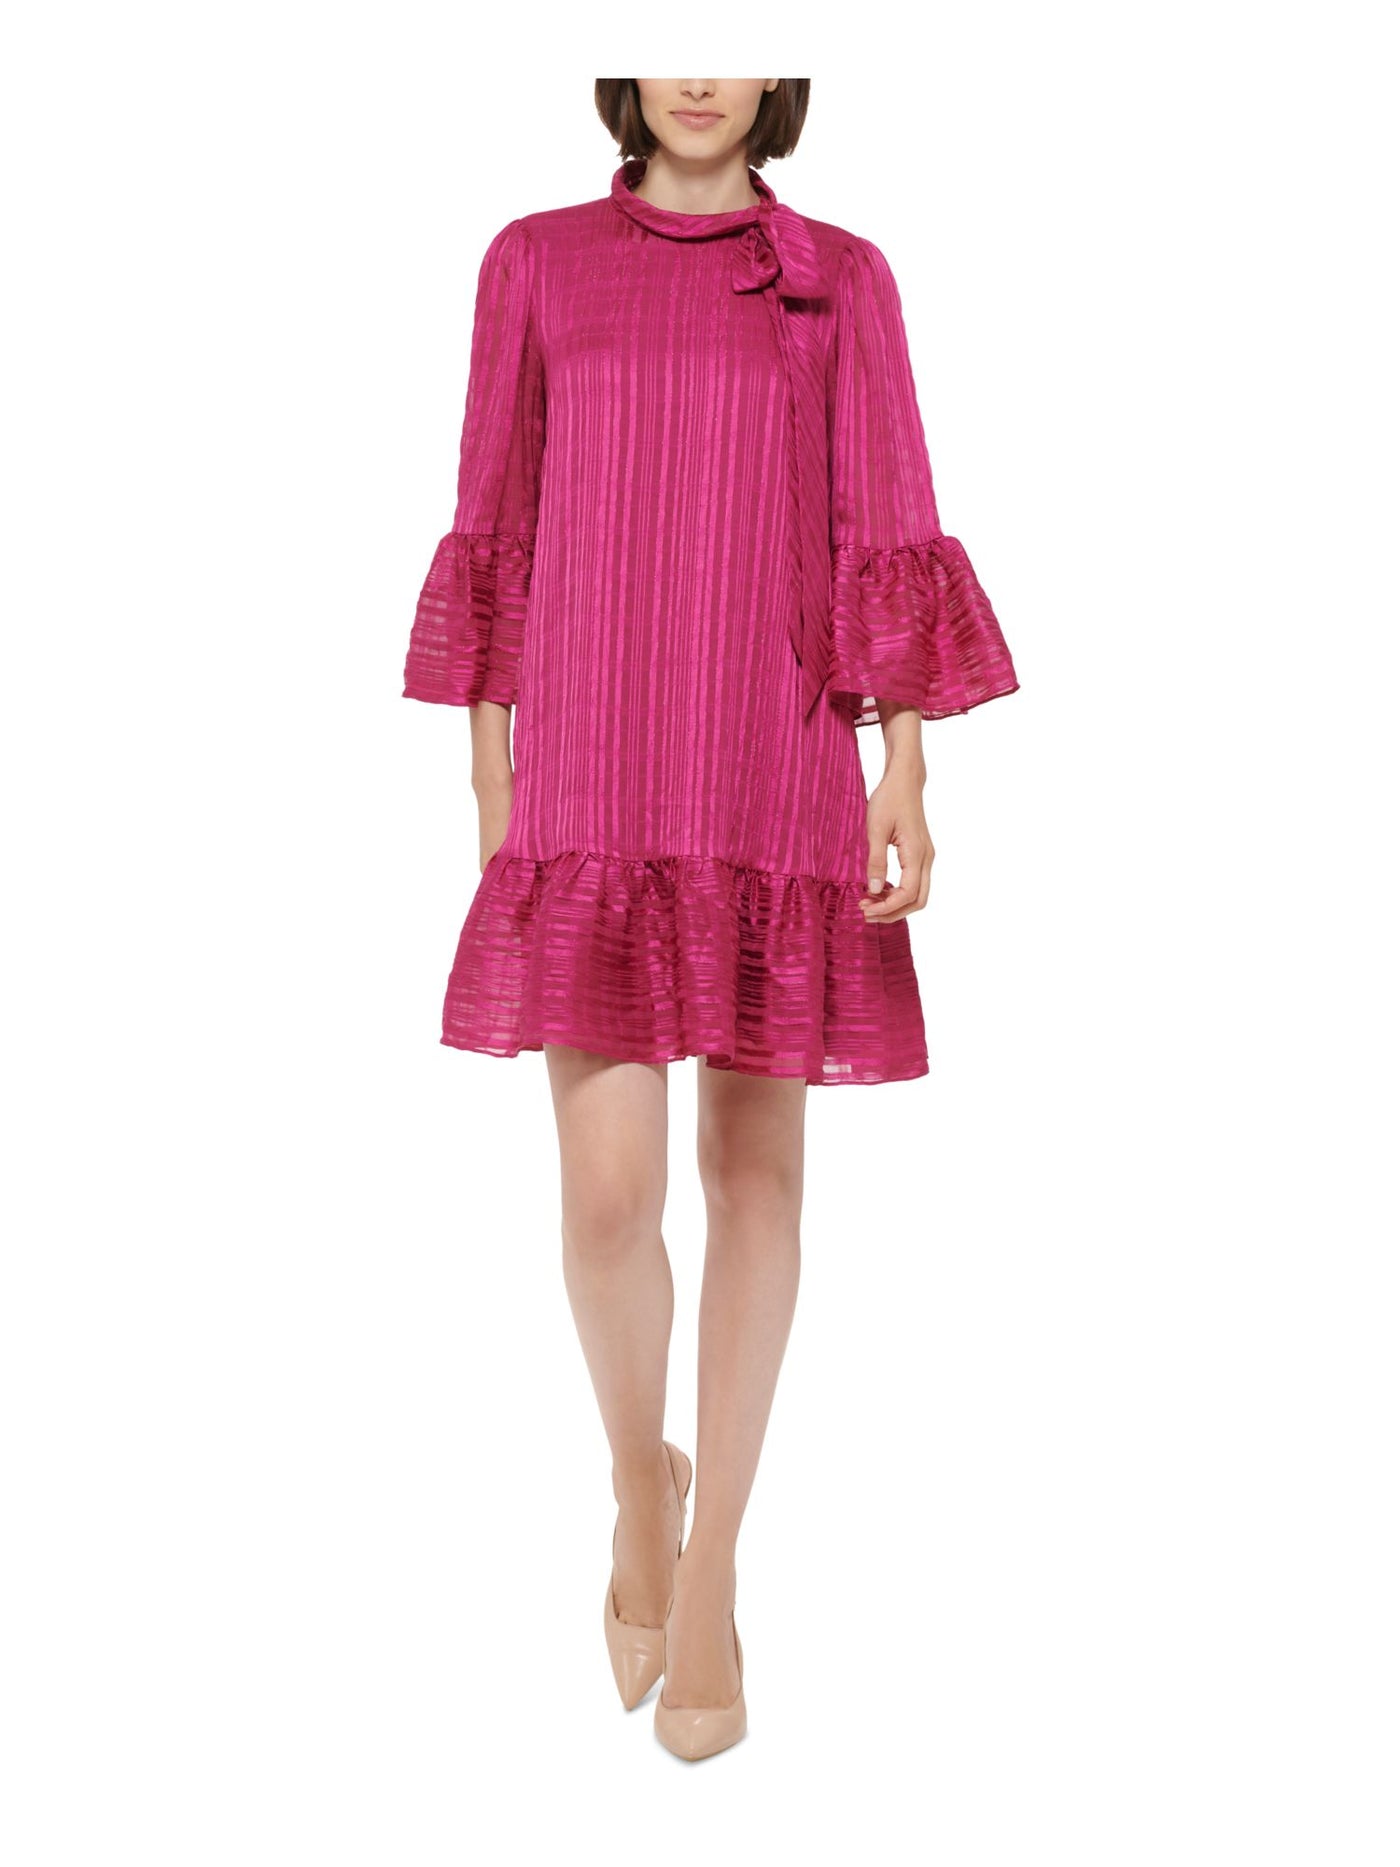 CALVIN KLEIN Womens Pink Striped Bell Sleeve Tie Neck Above The Knee Cocktail Shift Dress 8